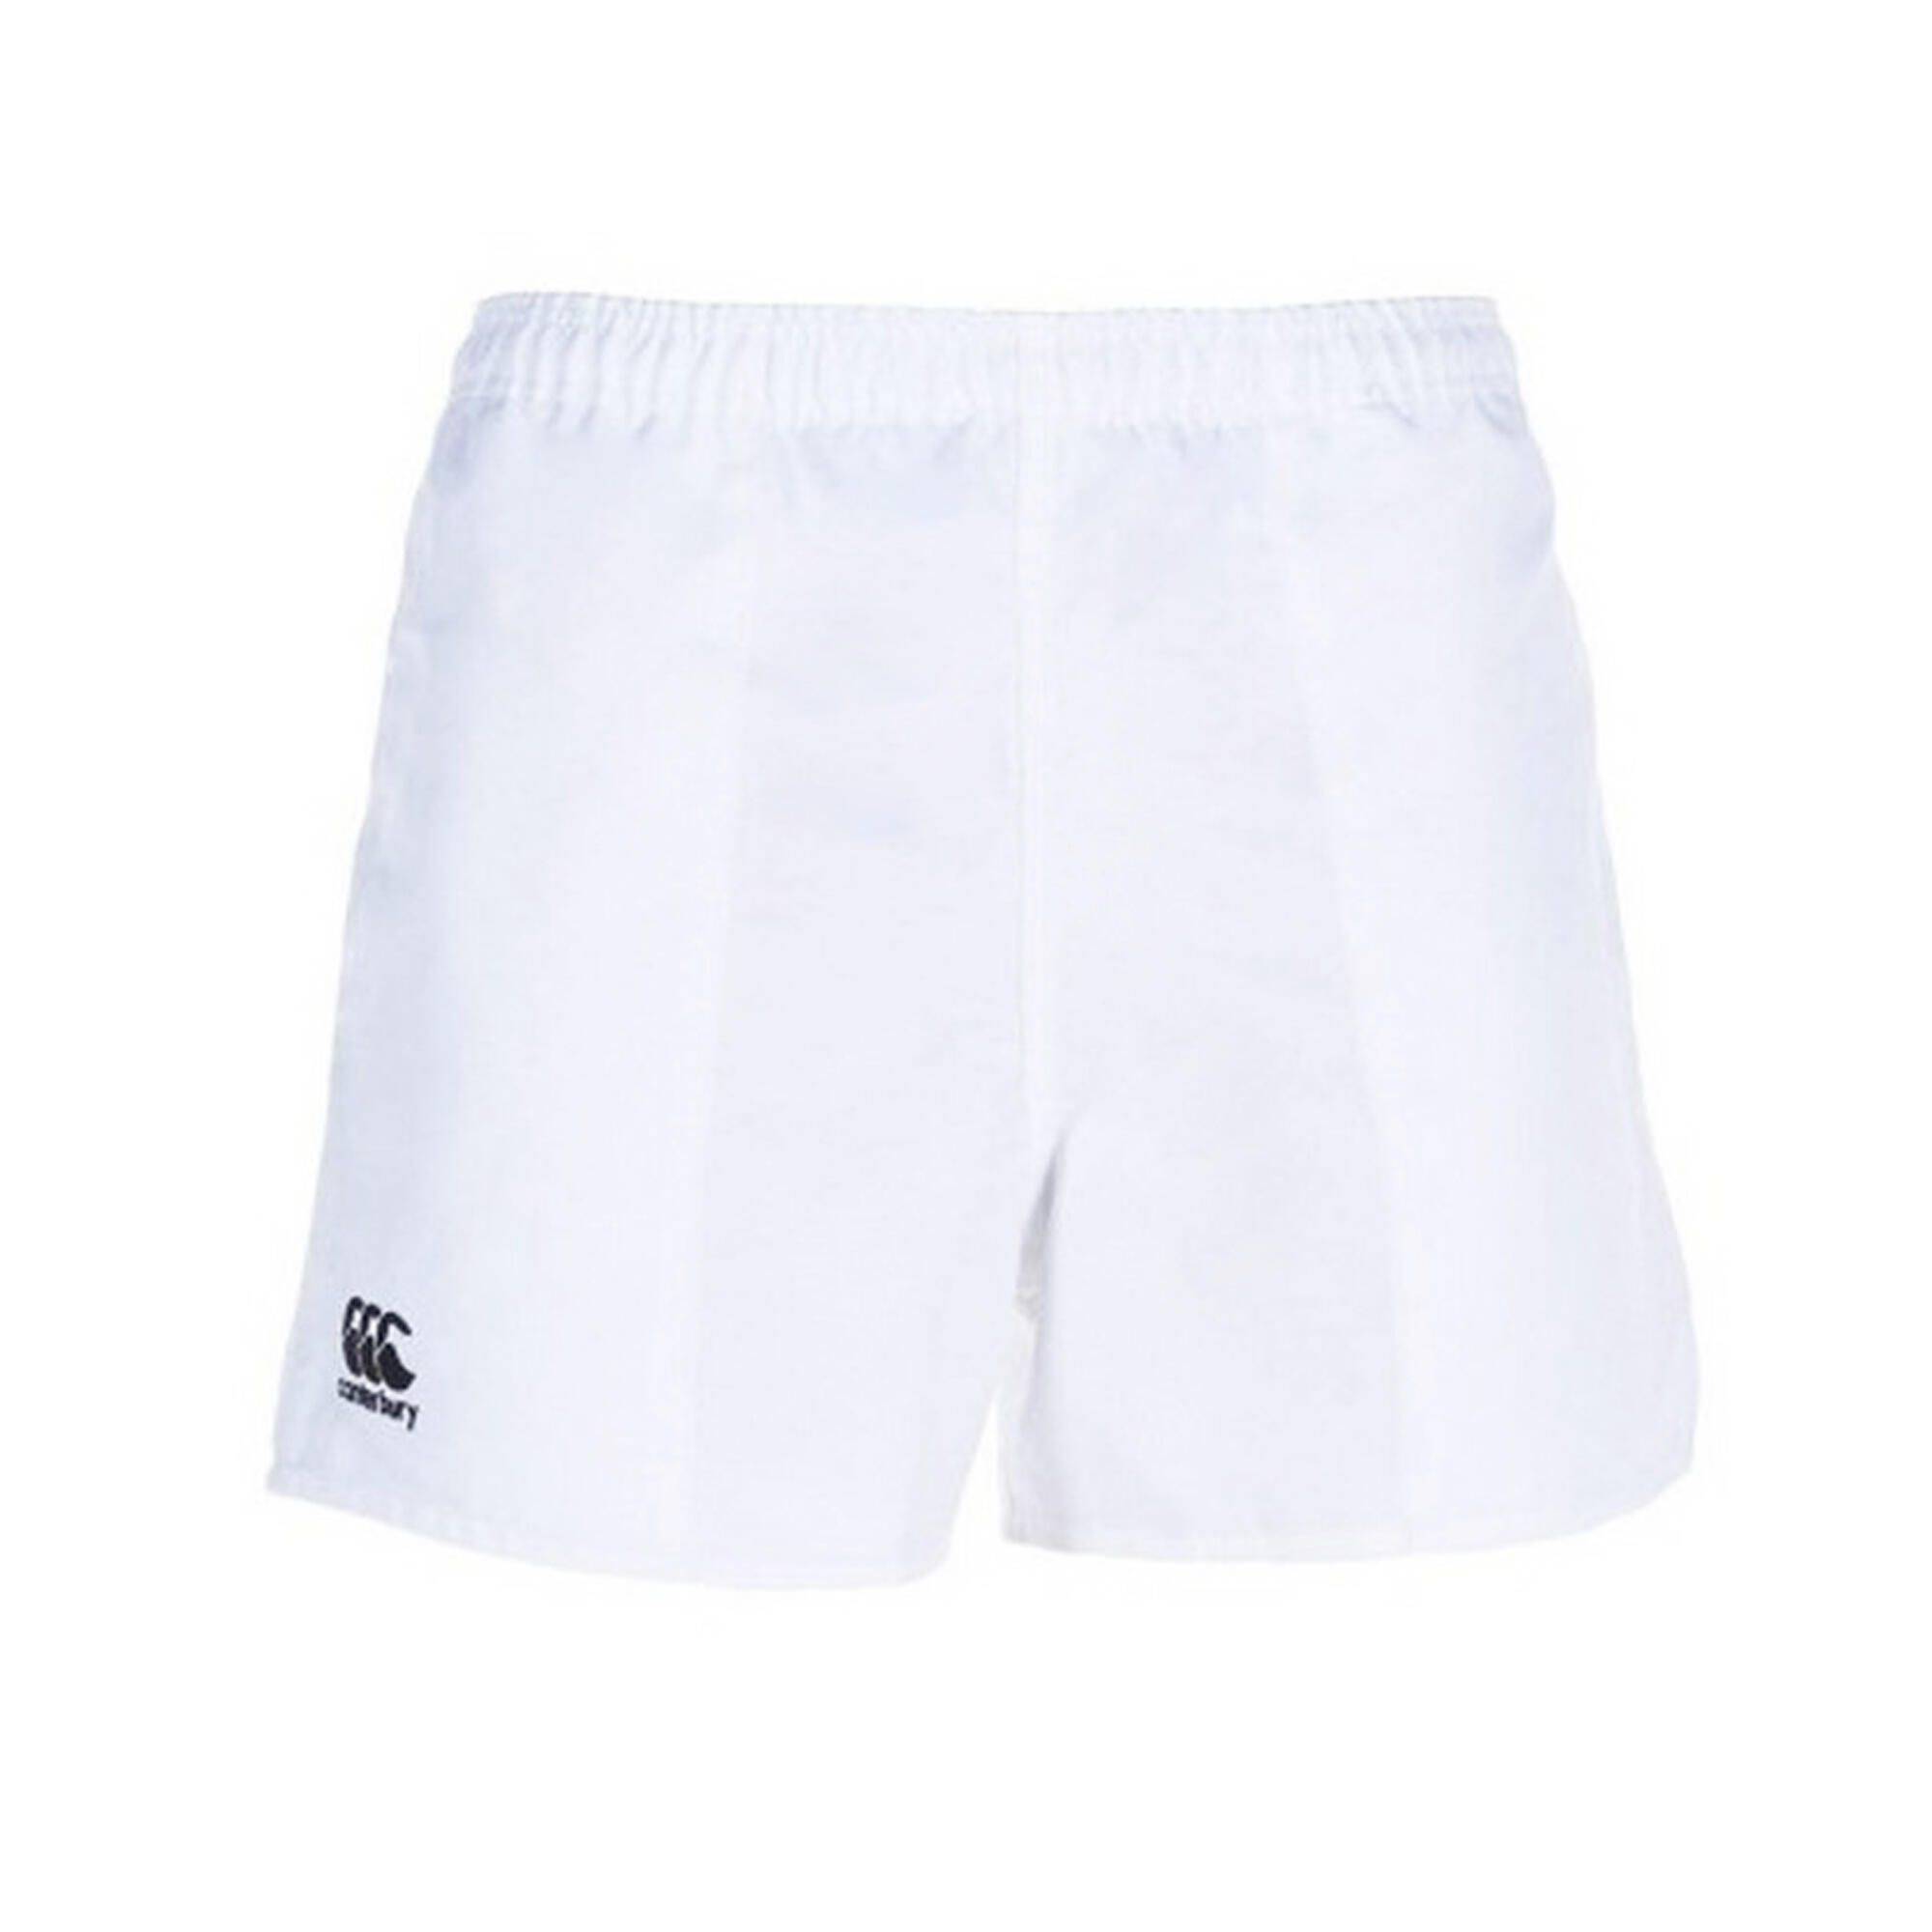 Mens Professional Polyester Shorts (White) 1/4